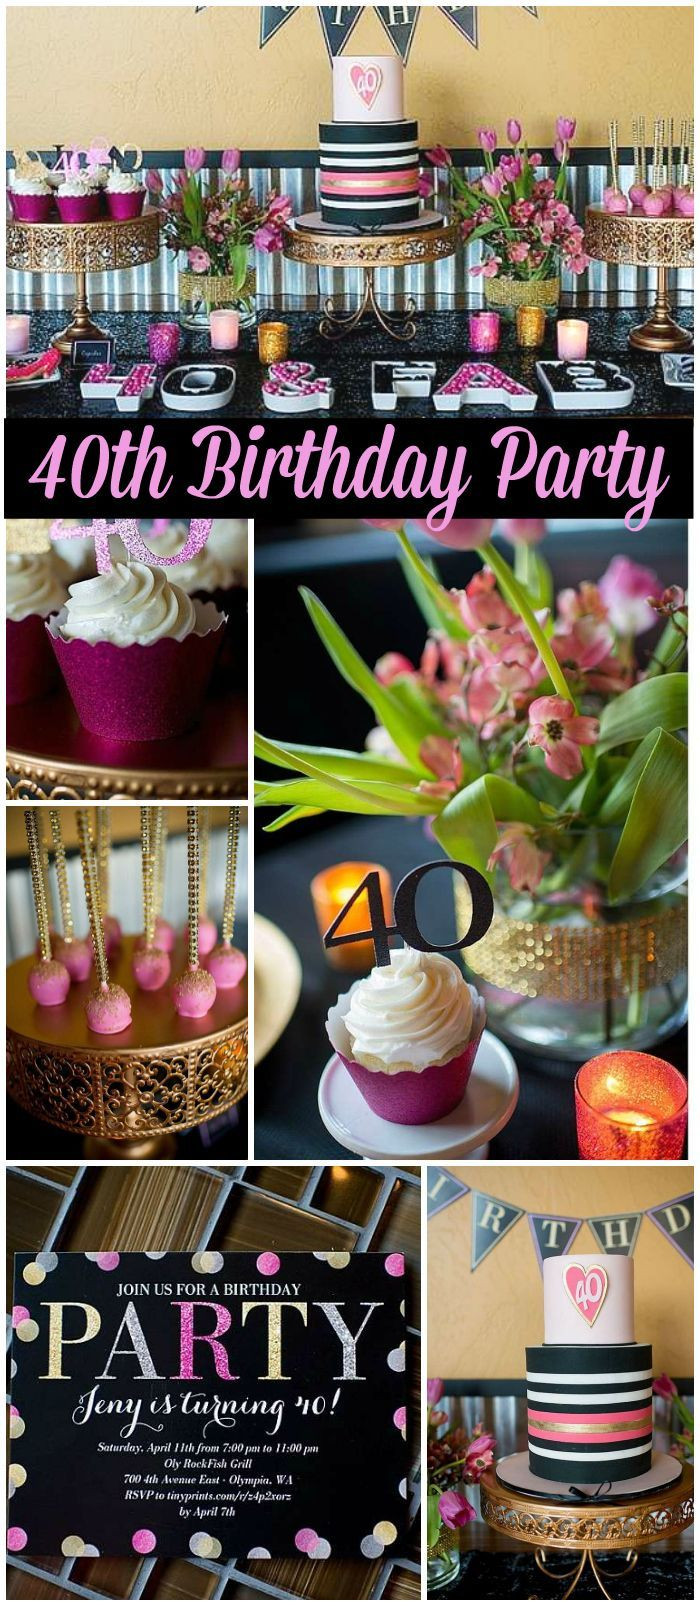 Forty Birthday Decorations
 Check out this glamorous 40th birthday party with stylish